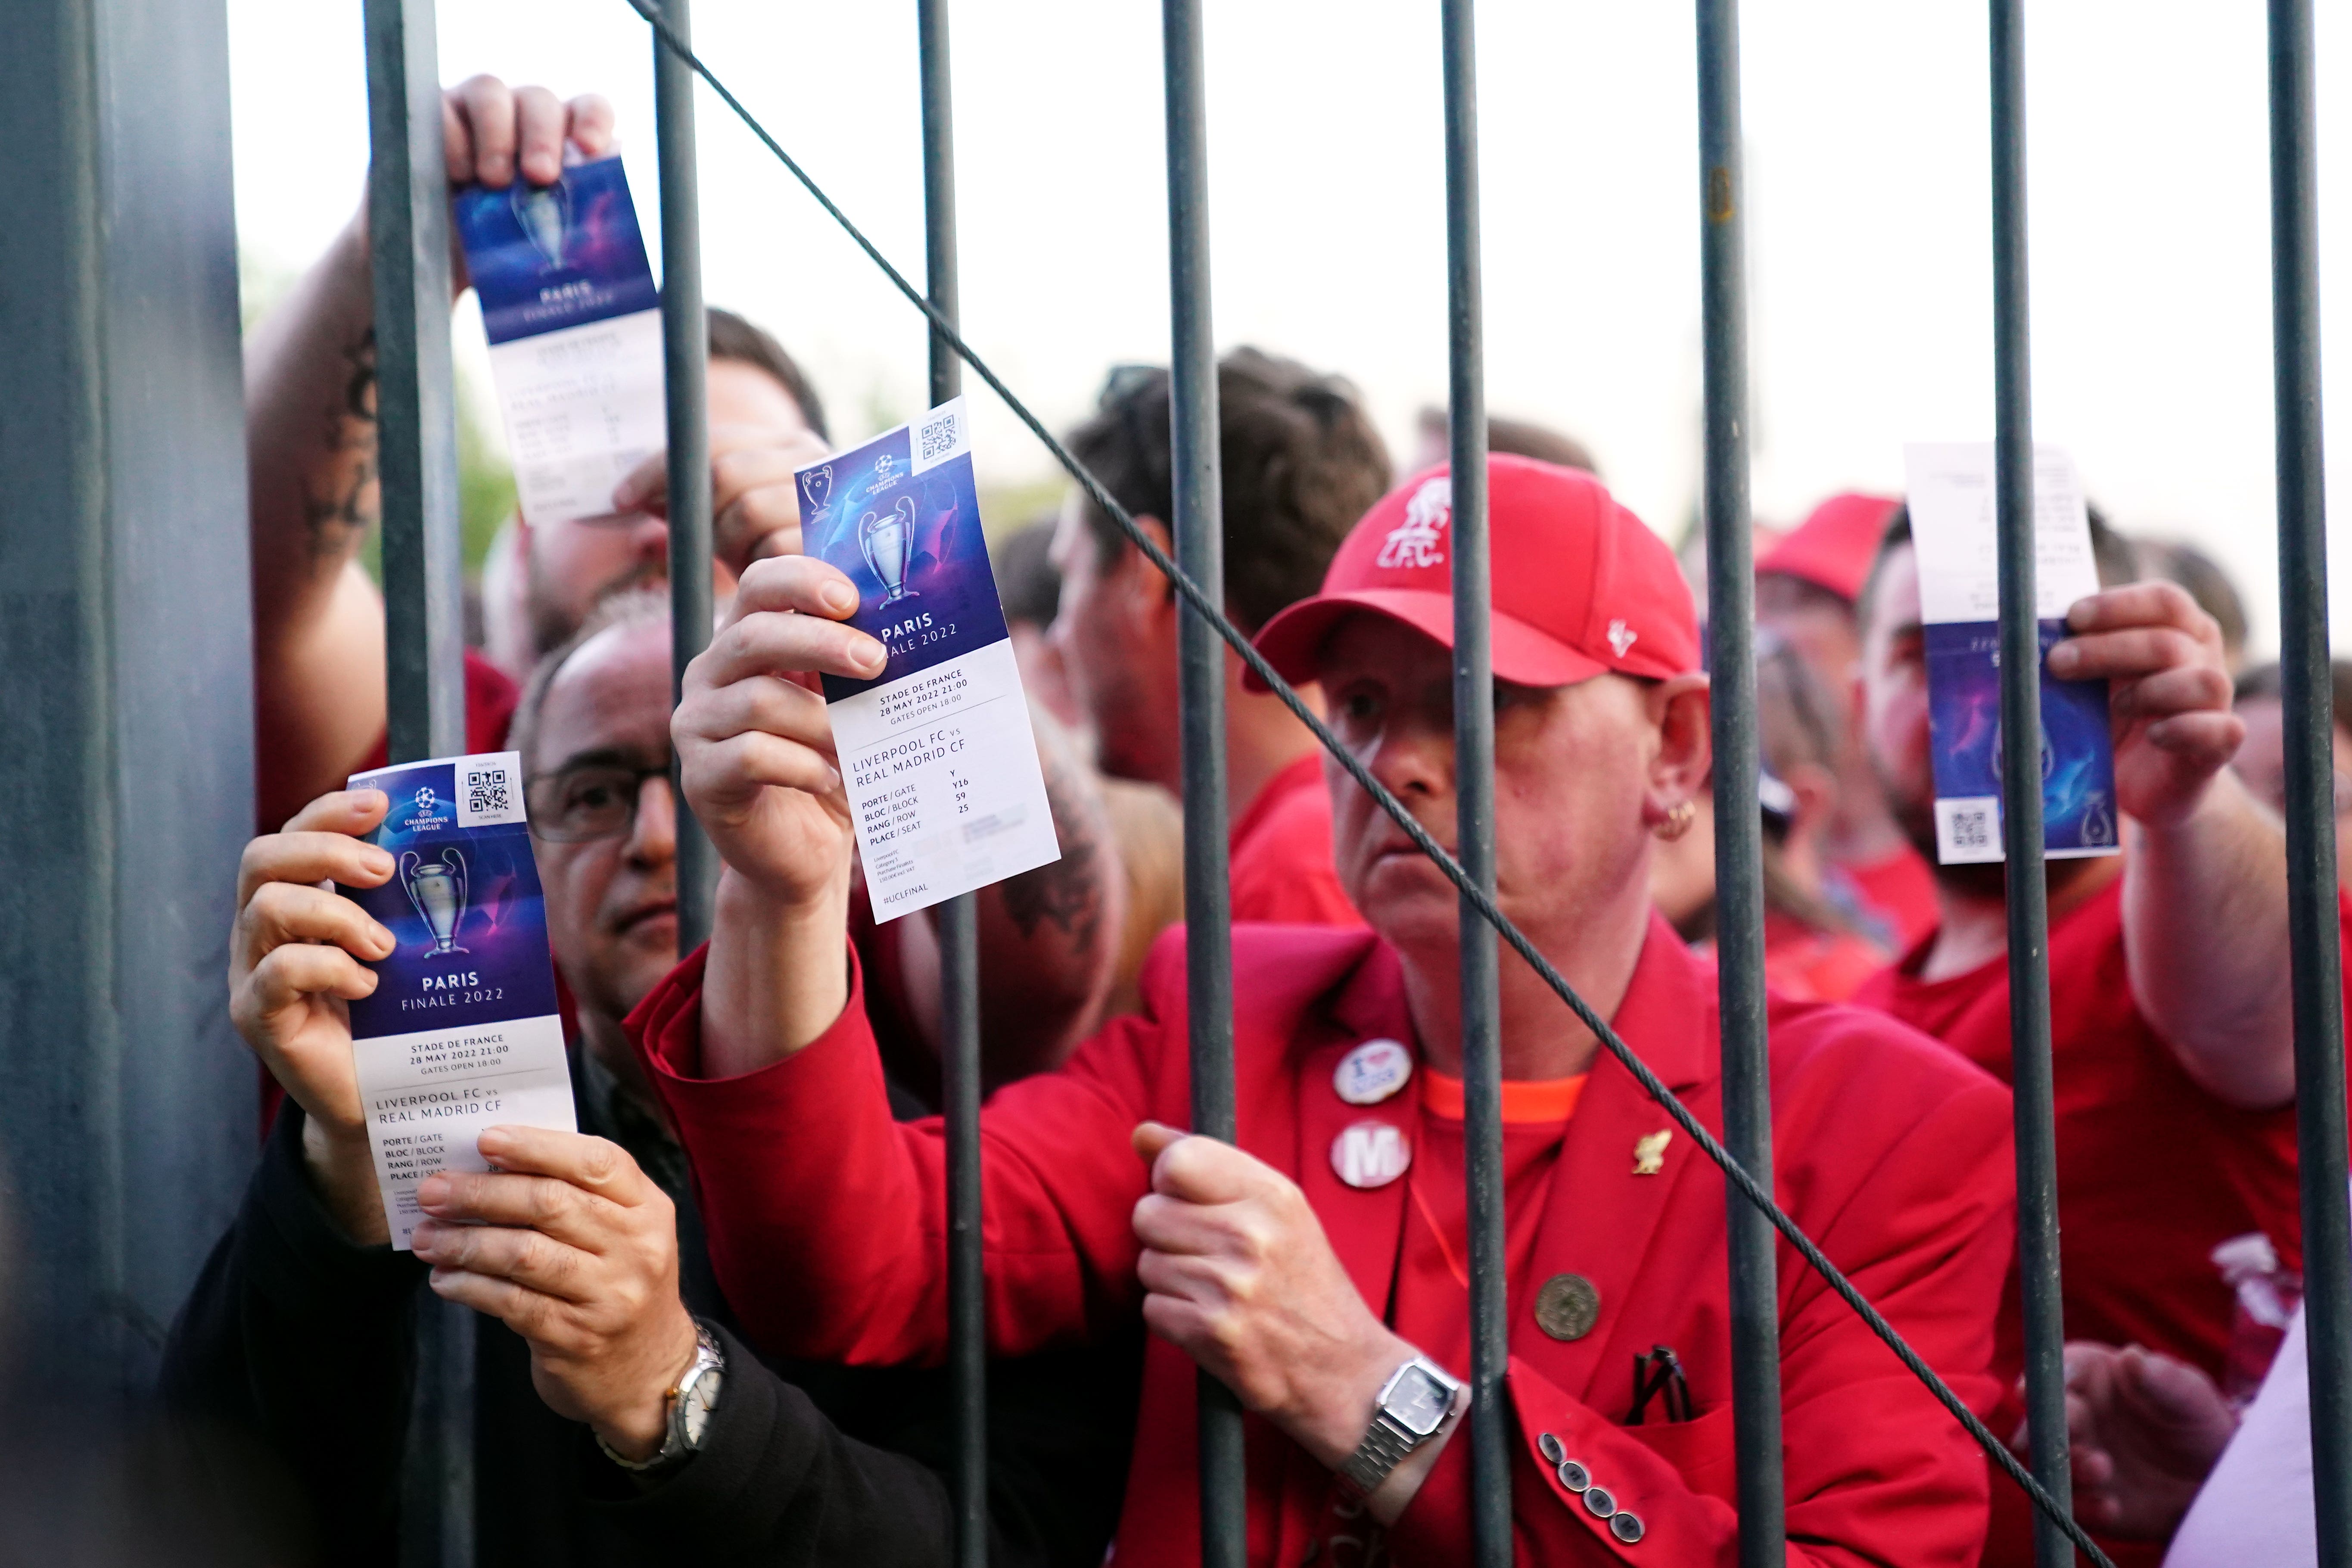 Liverpool fans stuck outside the Stade de France show their match tickets ahead of last season’s Champions League final (Adam Davy/PA)